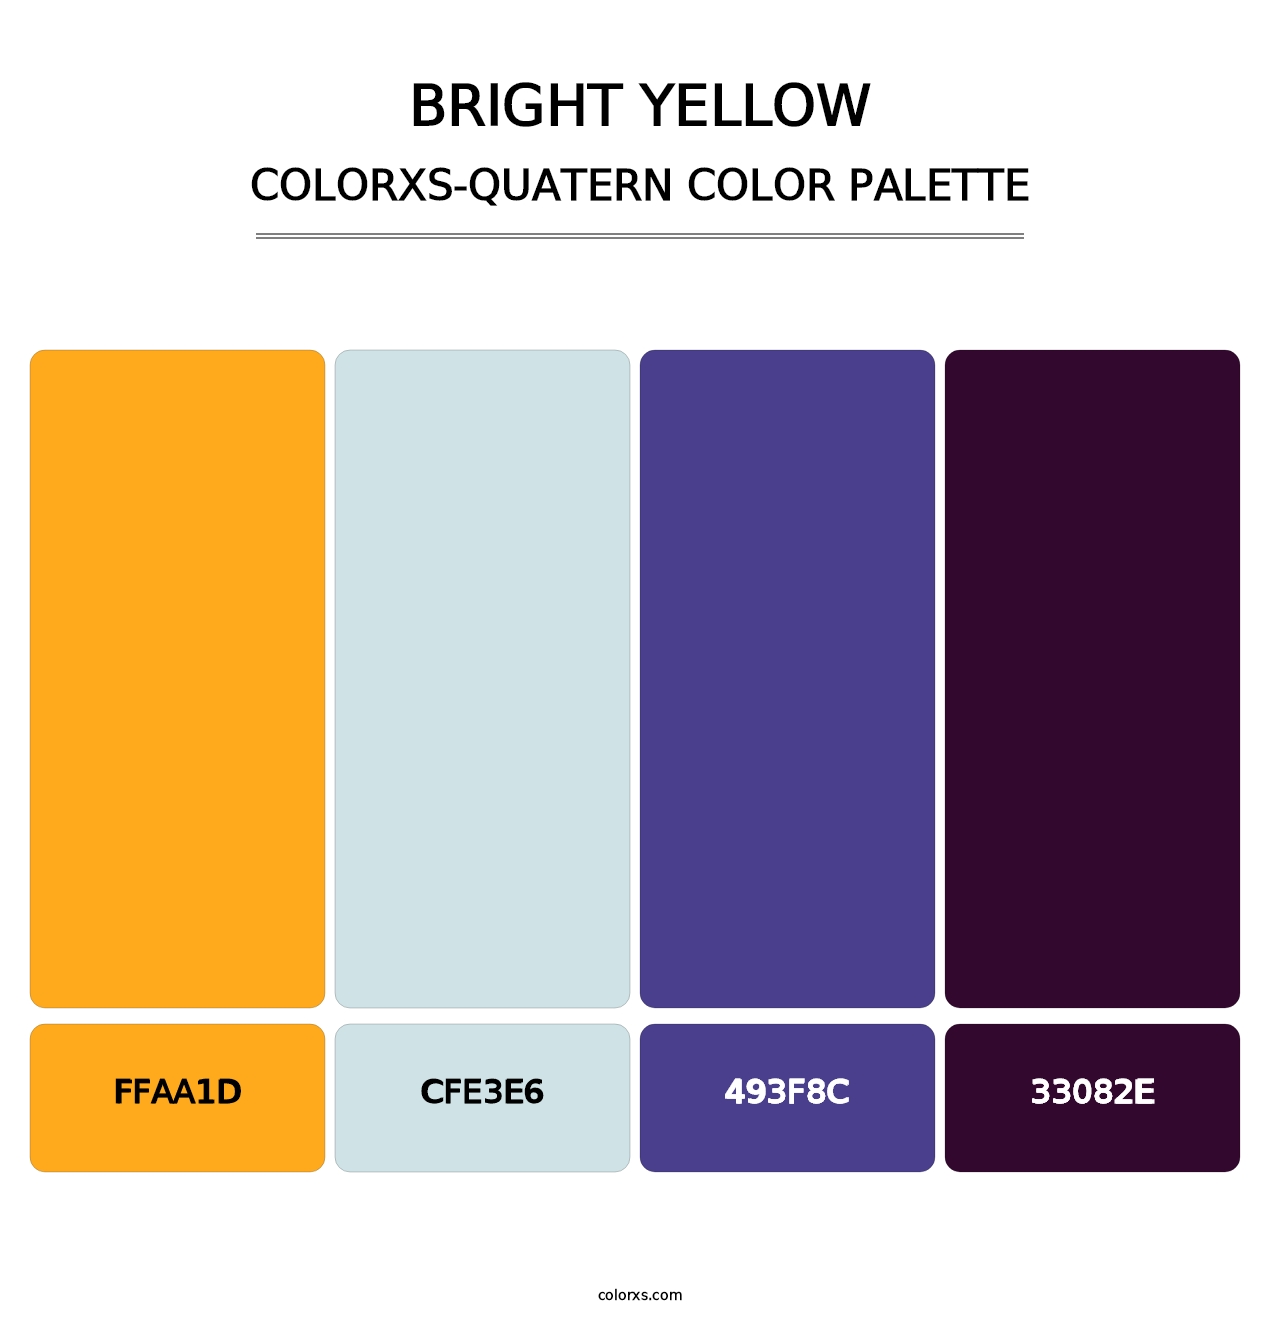 Bright Yellow - Colorxs Quatern Palette